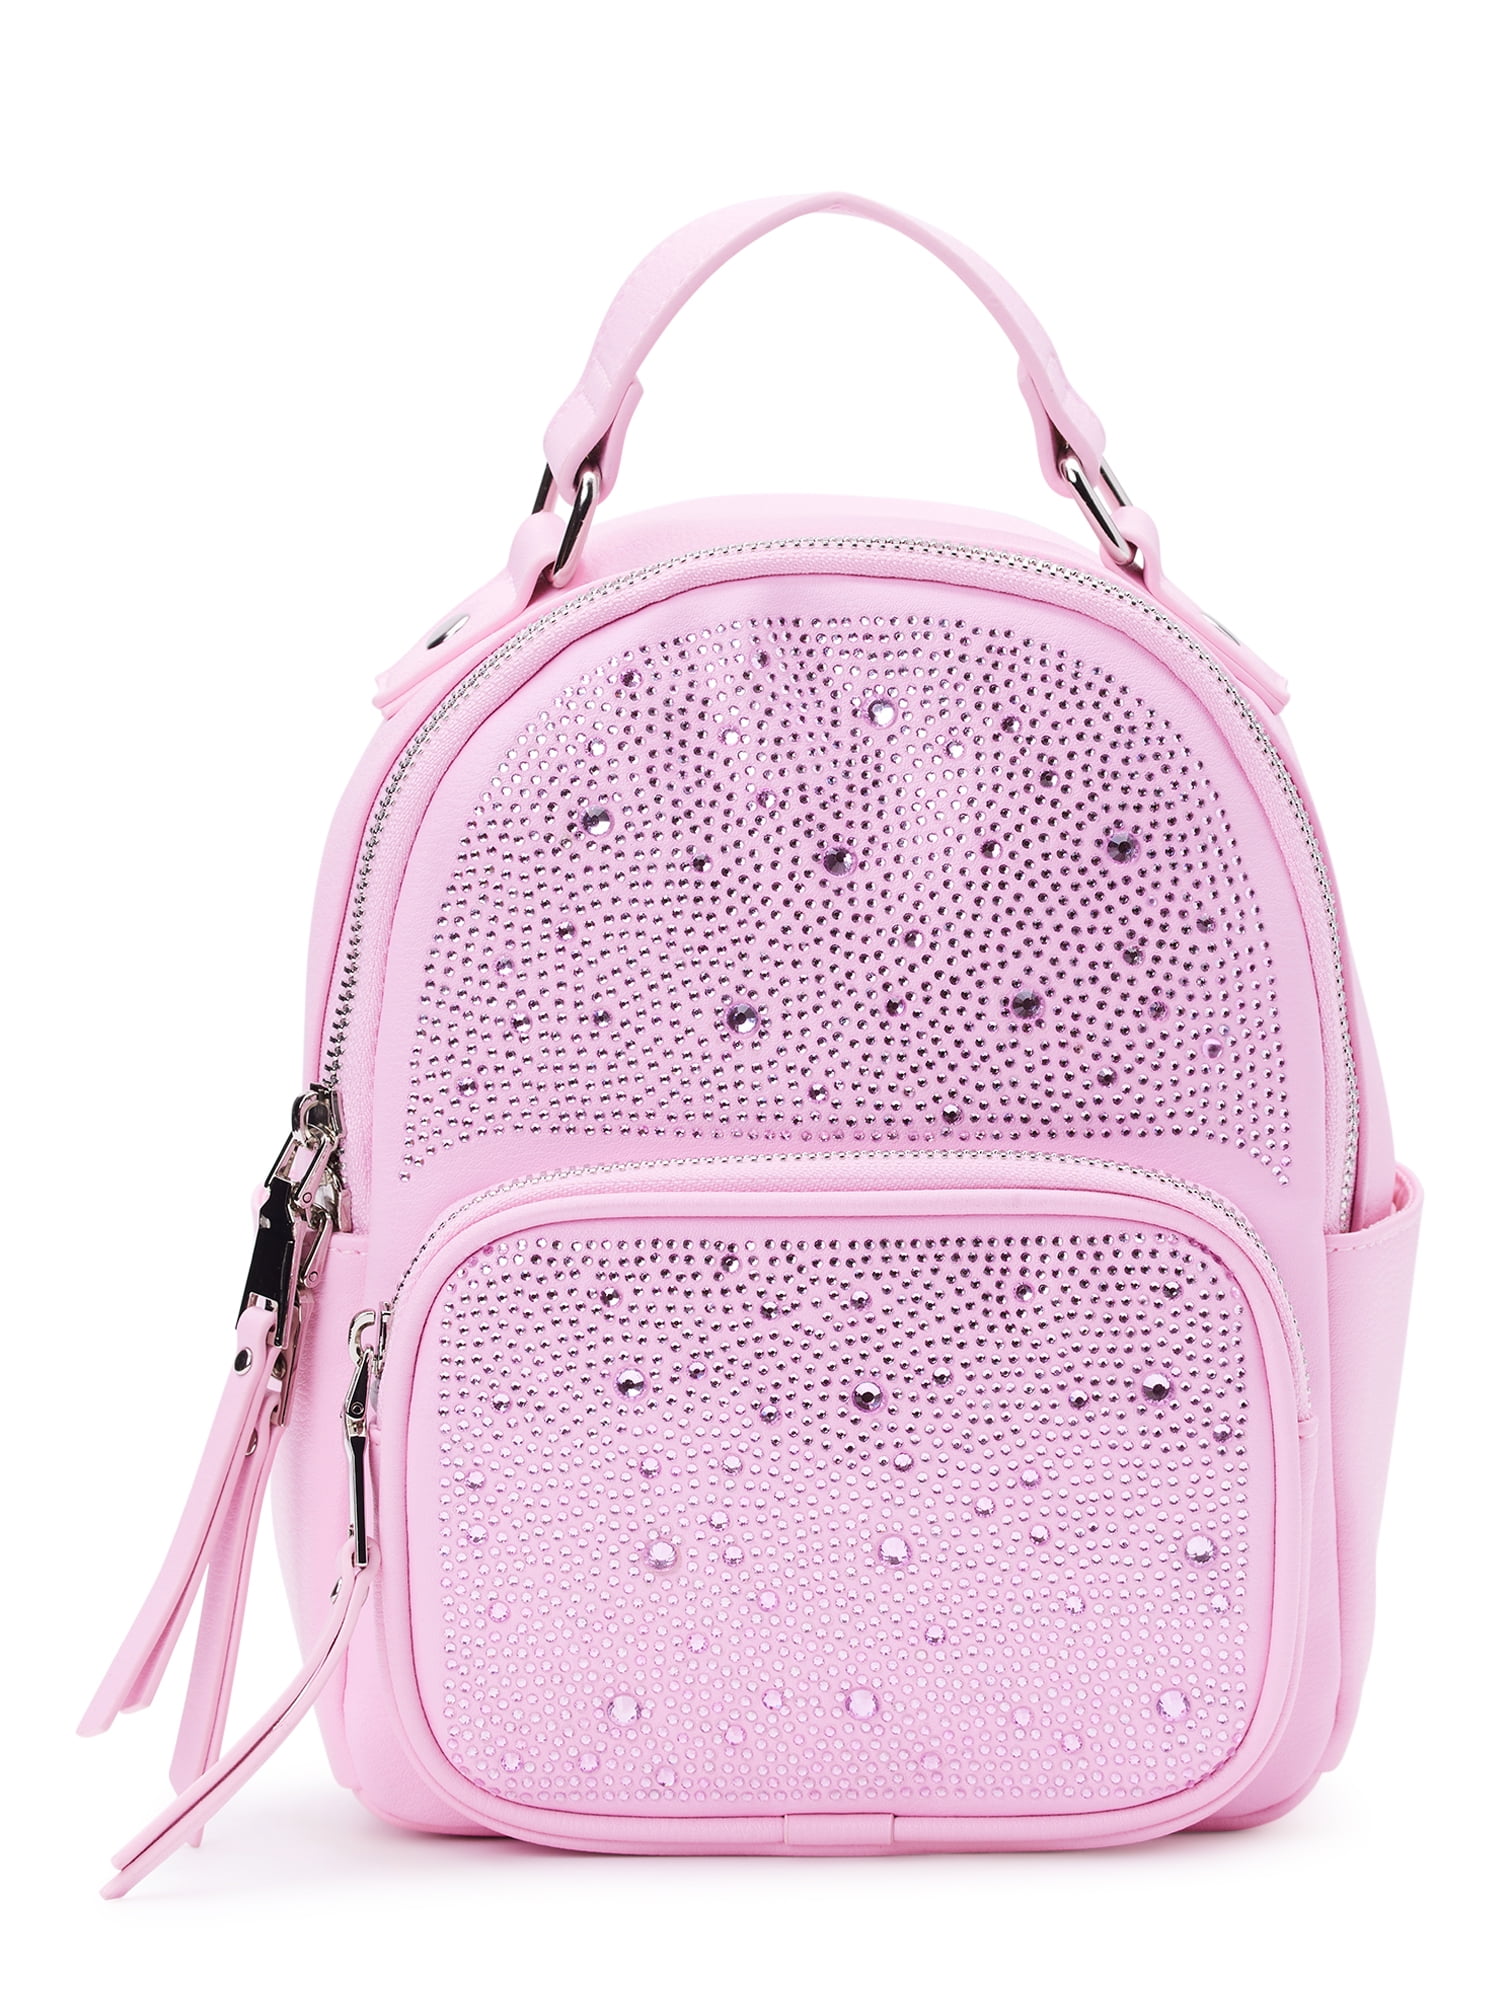 Madden NYC Women's Crystal Micro Dome Backpack, Light Pink - Walmart.com